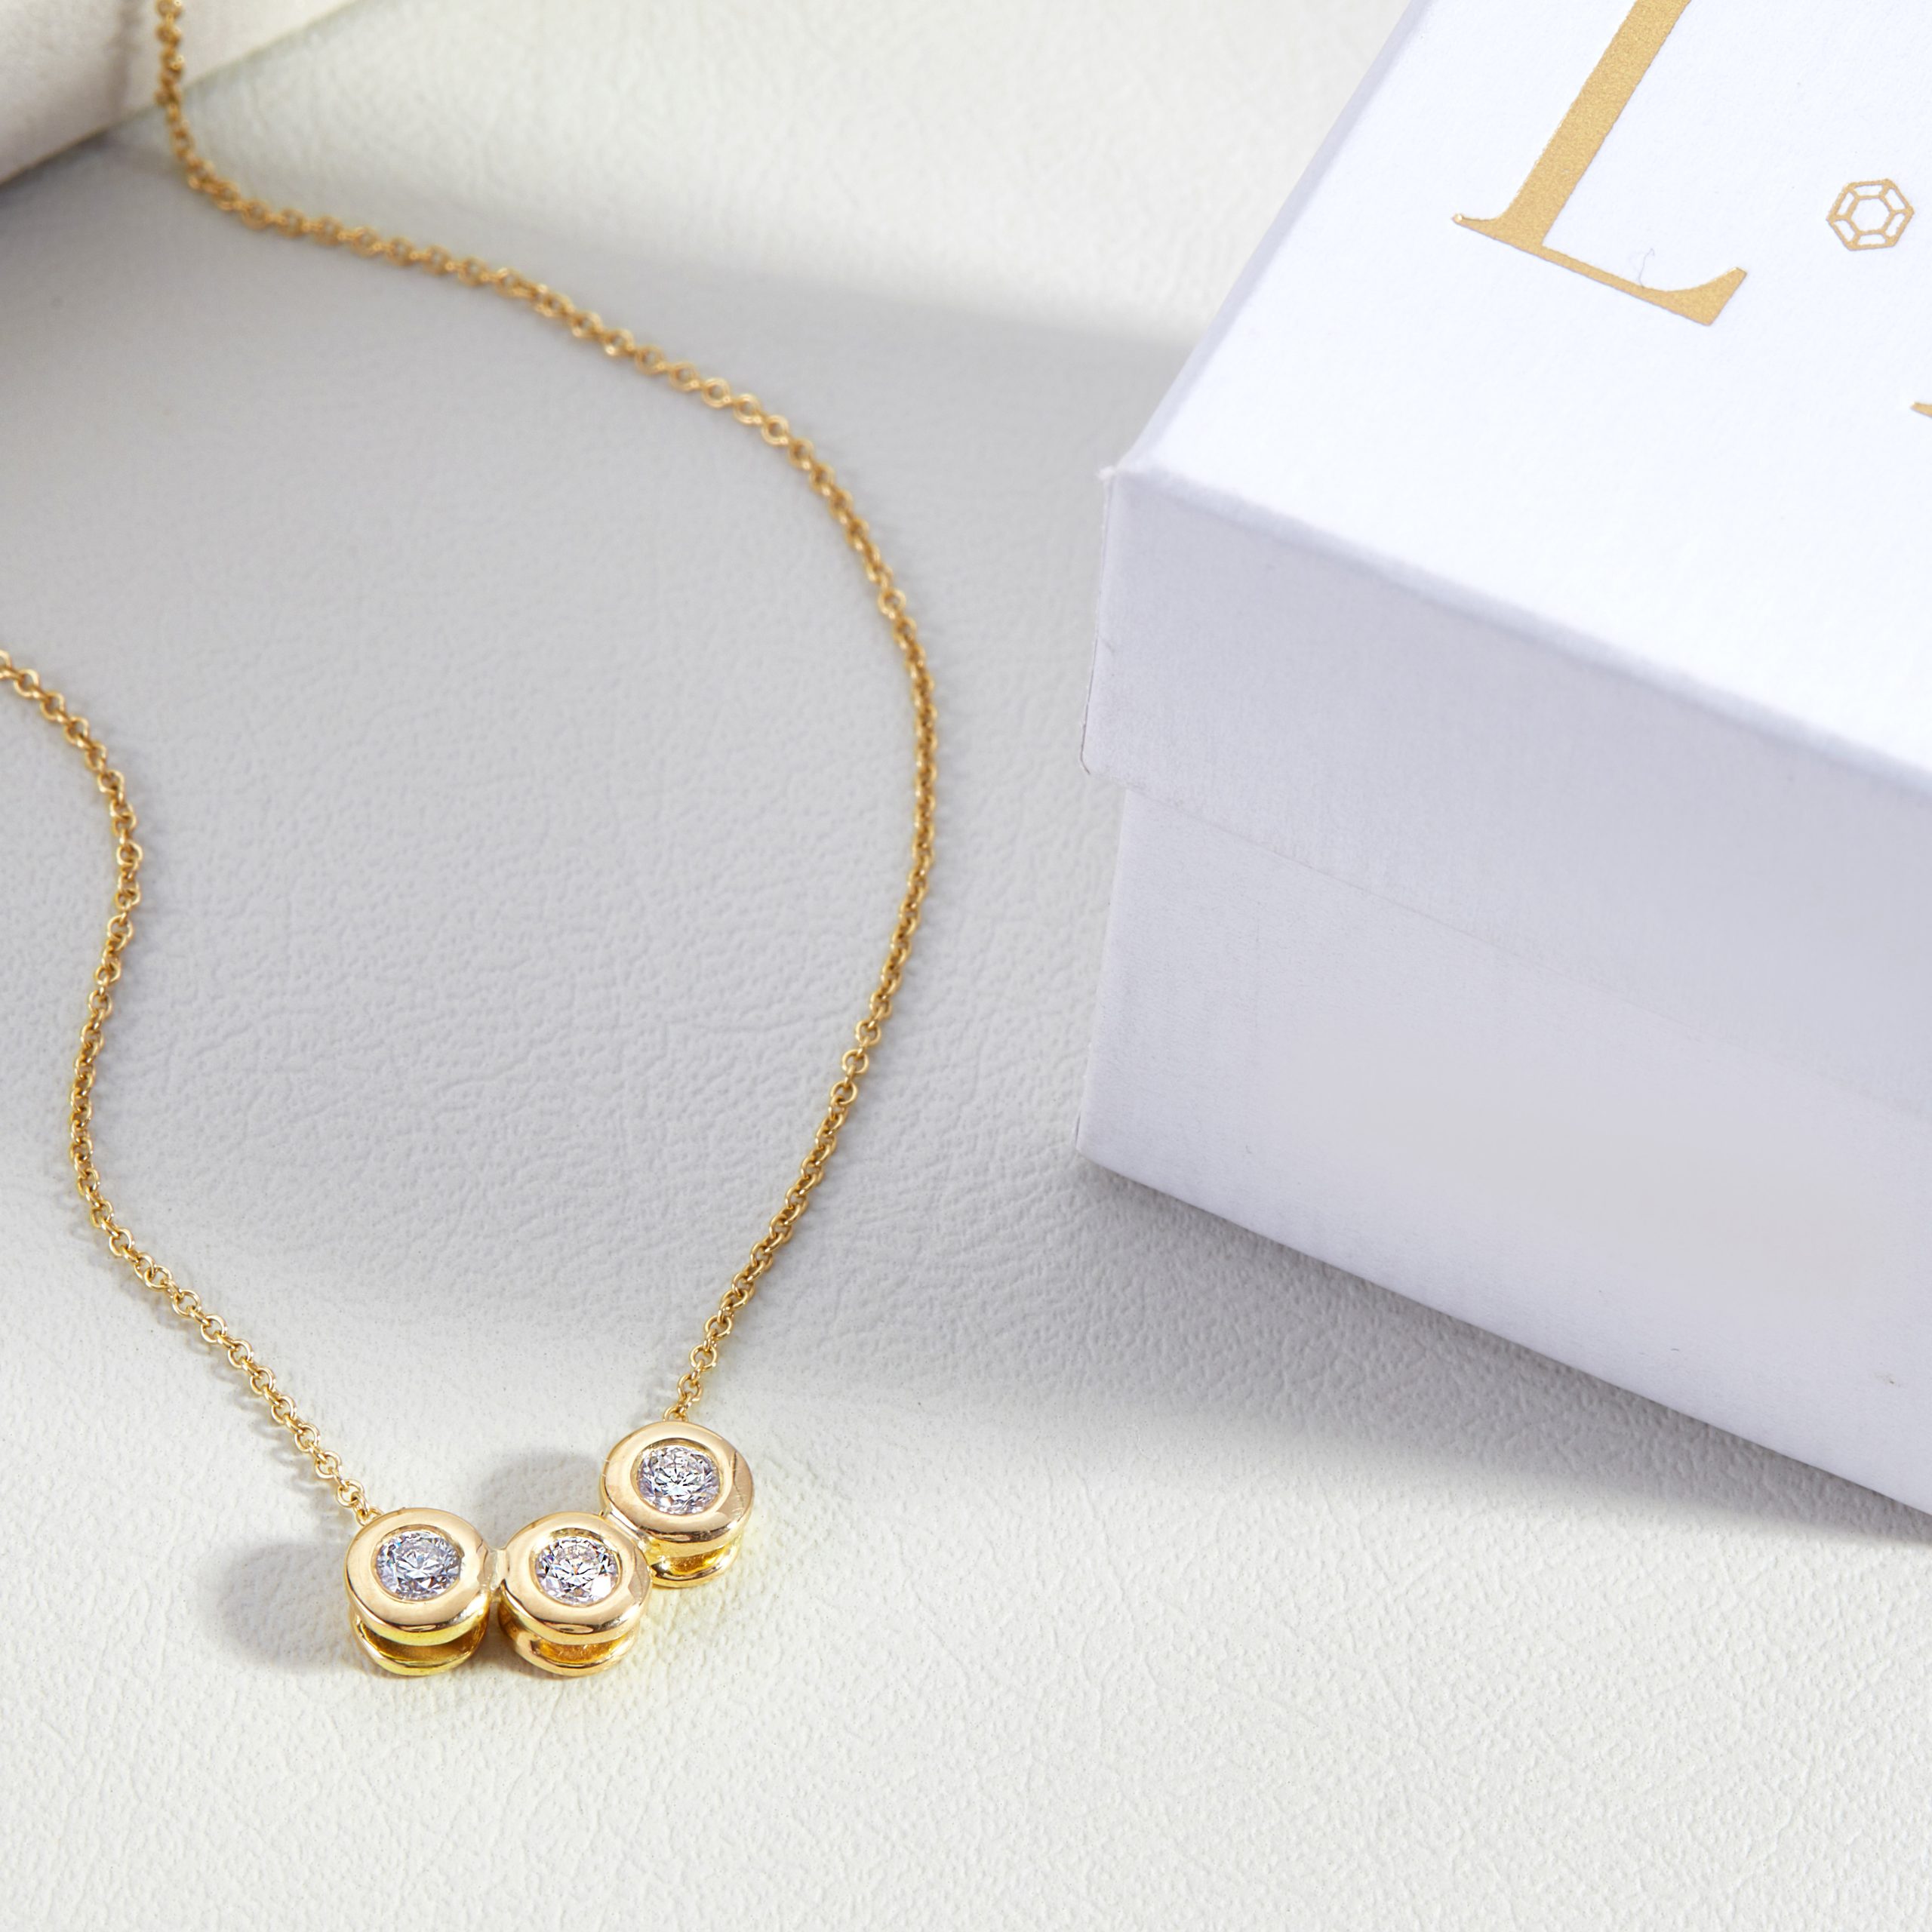 Gold necklace with three small circles containing diamonds.